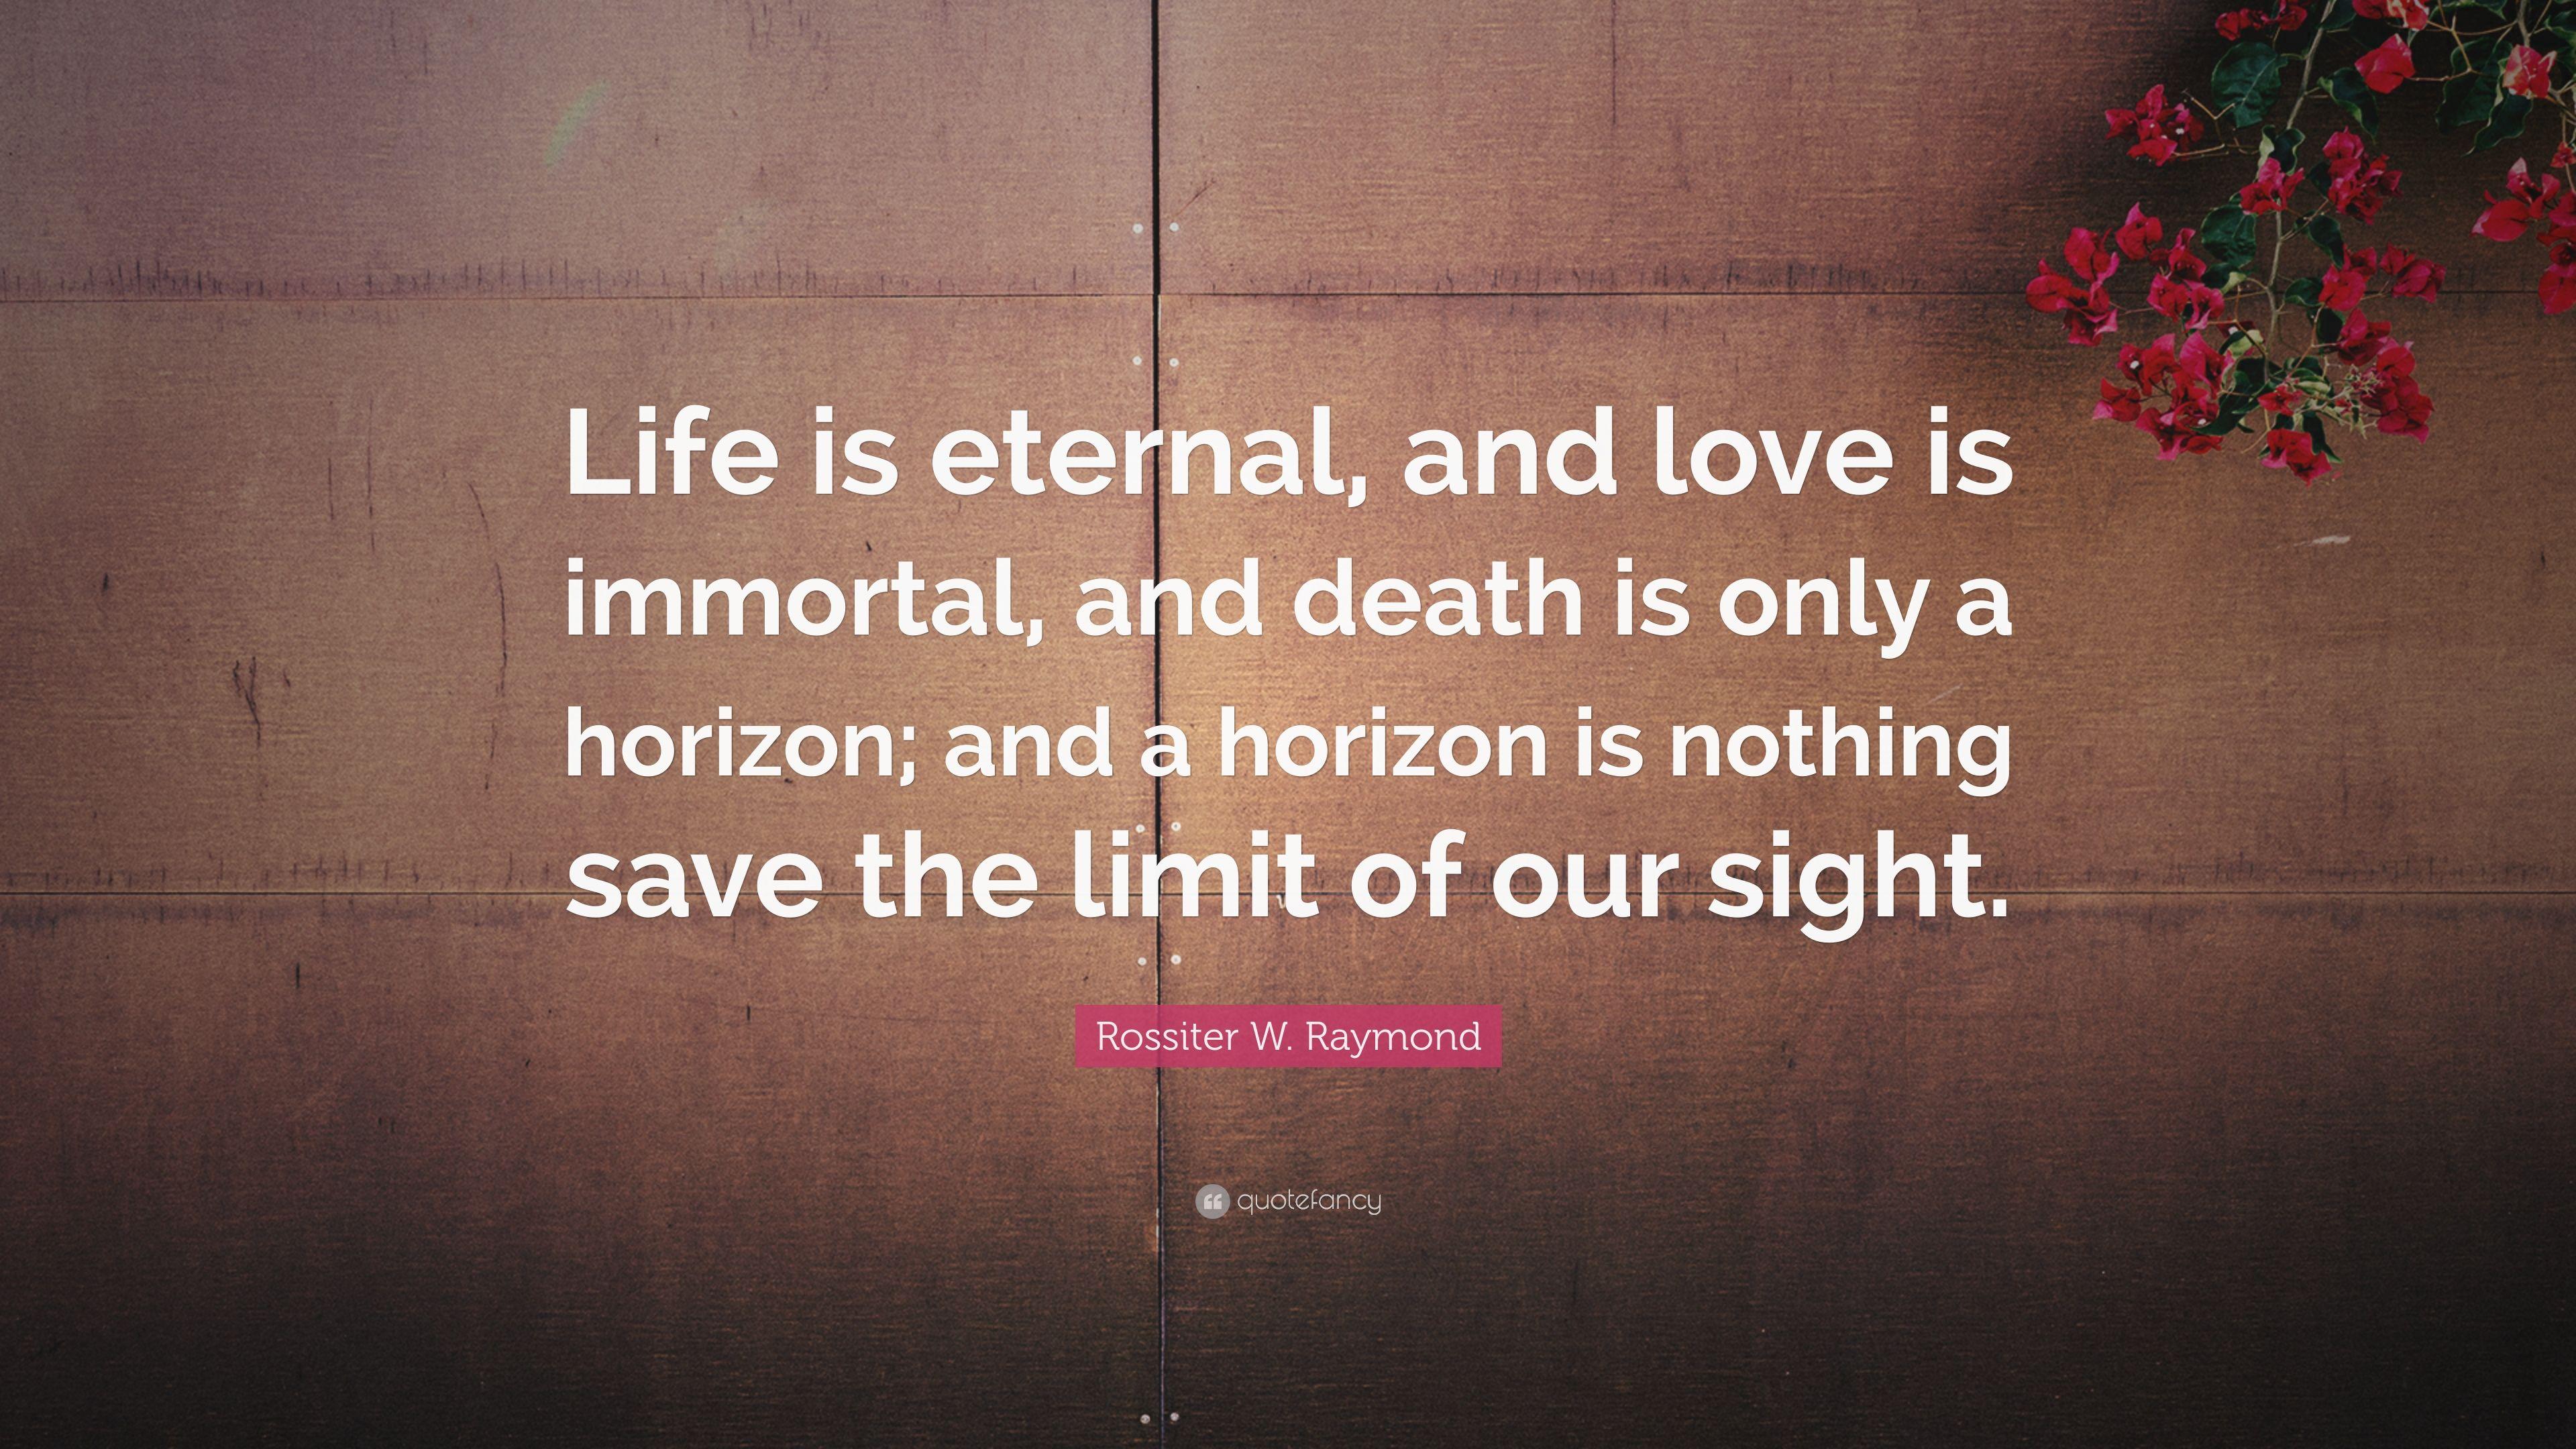 Rossiter W. Raymond Quote: “Life is eternal, and love is immortal